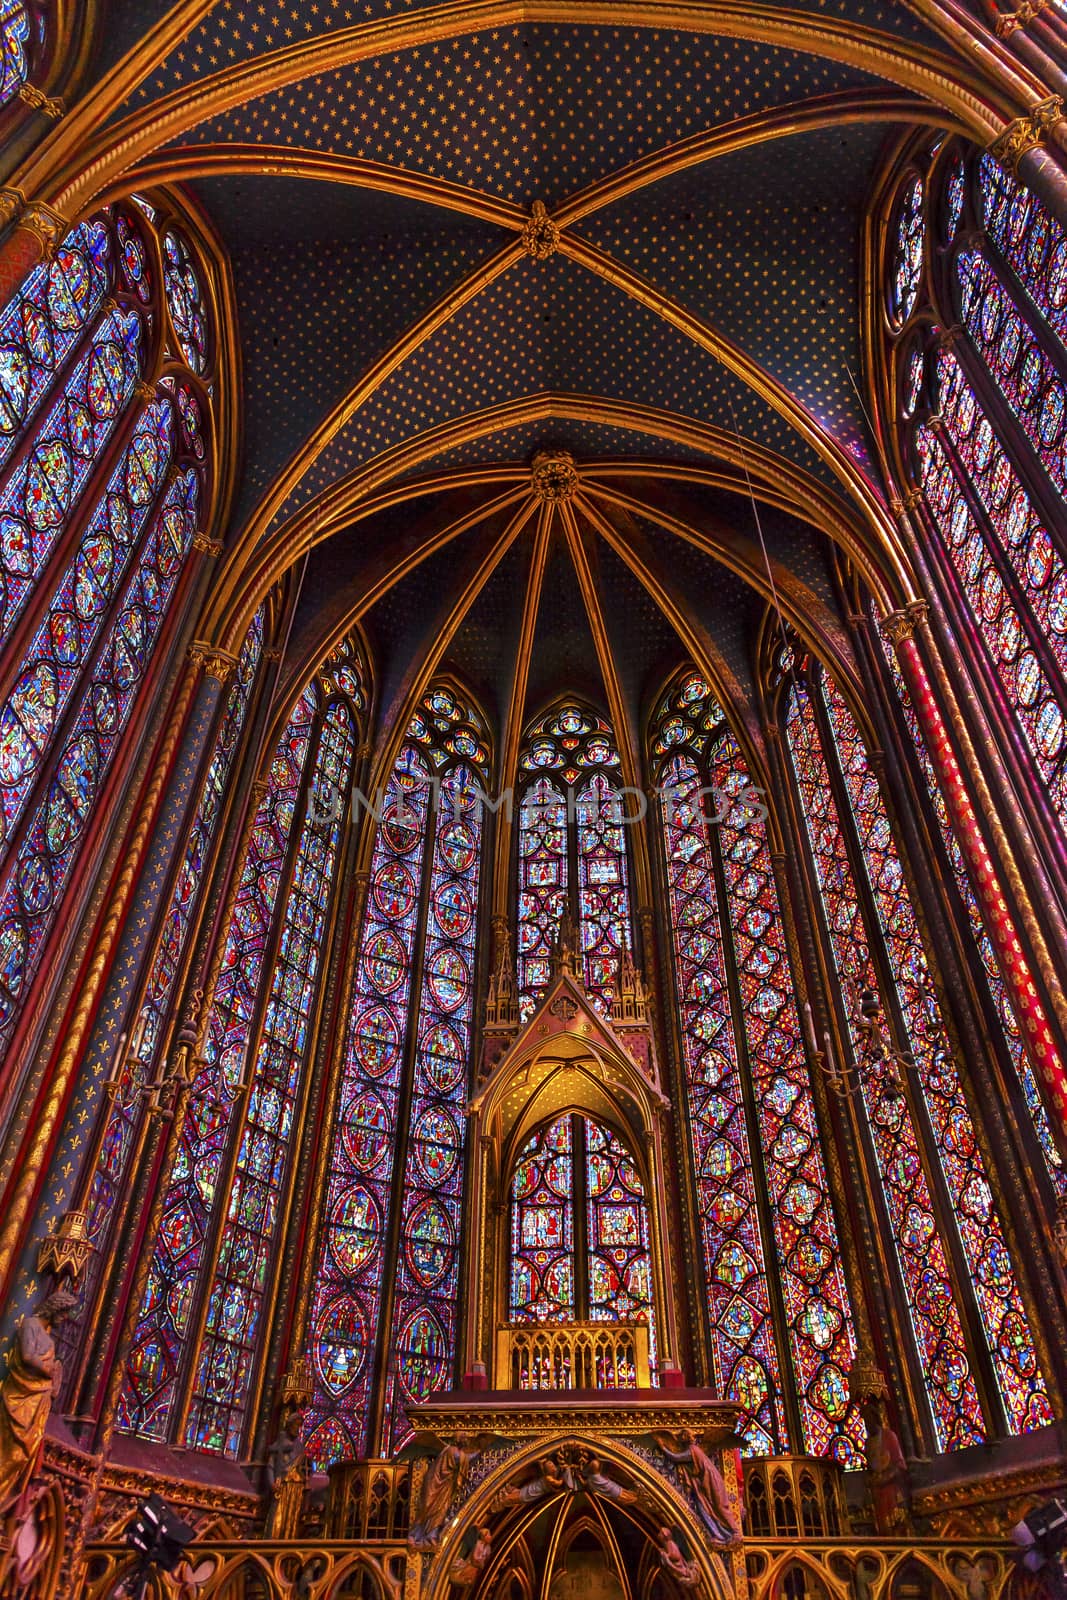 Stained Glass Saint Chapelle Cathedral Paris France.  Saint King Louis 9th created Sainte Chappel in 1248 to house Christian relics, including Christ's Crown of Thorns.  Stained Glass created in the 13th Century and shows various biblical stories along wtih stories from 1200s.